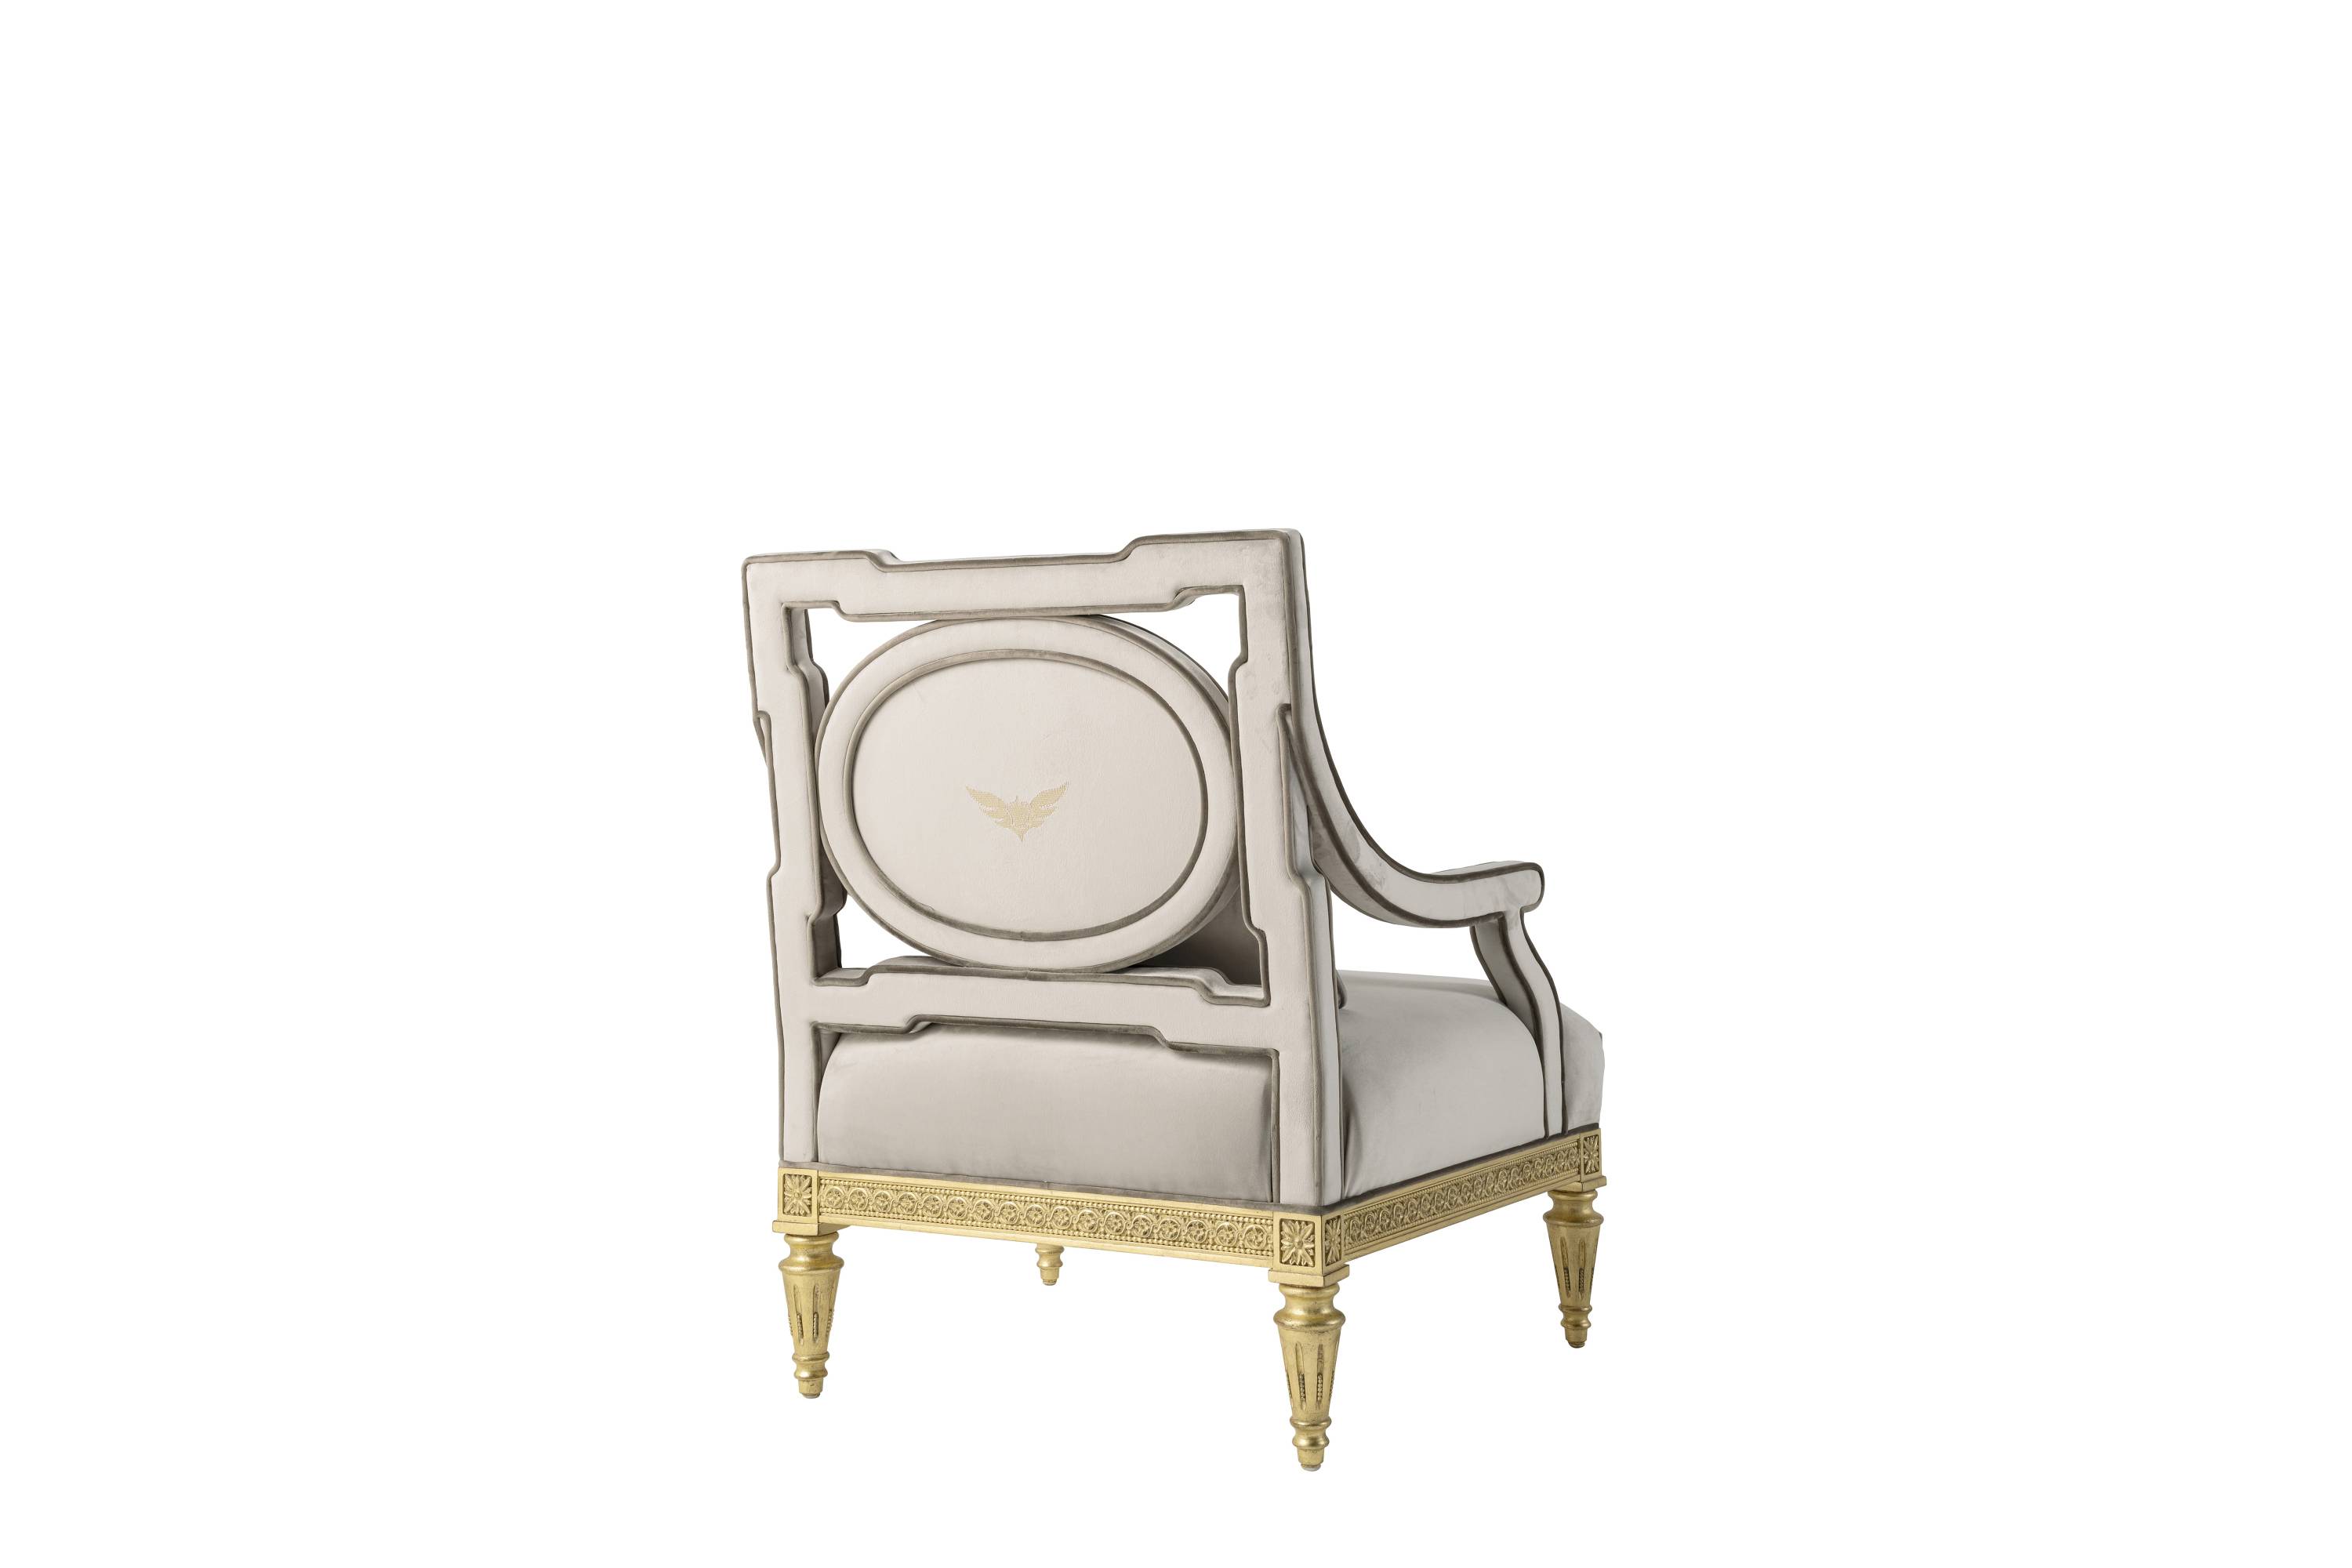 SATIN armchair - Bespoke projects with luxury Made in Italy classic furniture